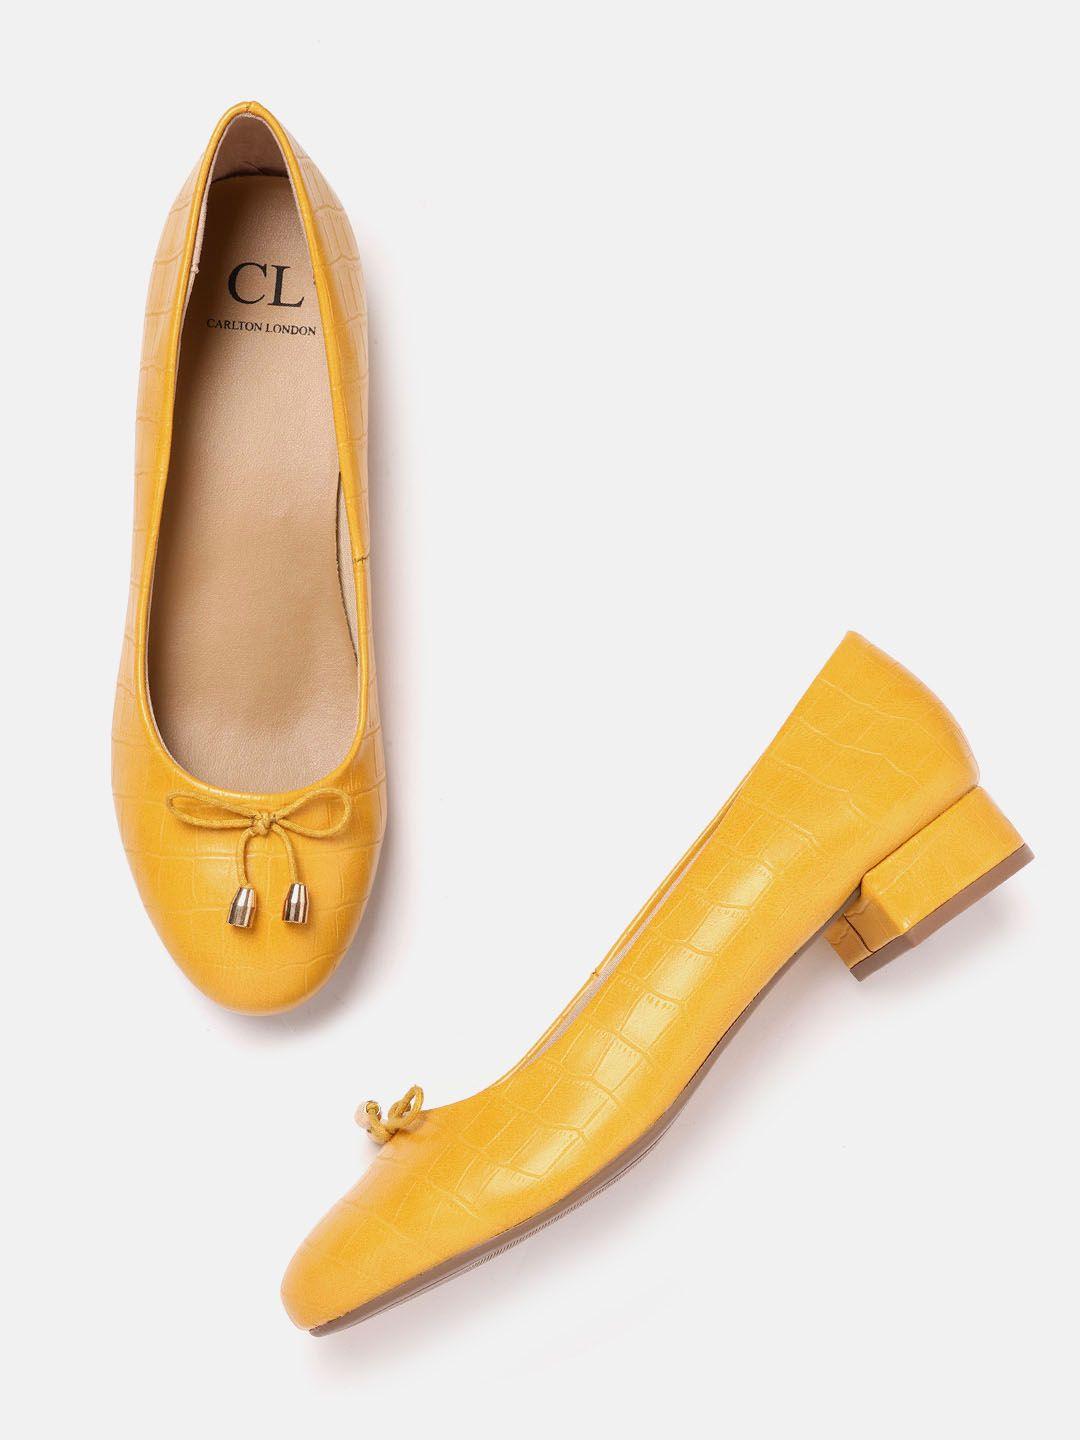 carlton london mustard yellow croc textured pumps with bow detail